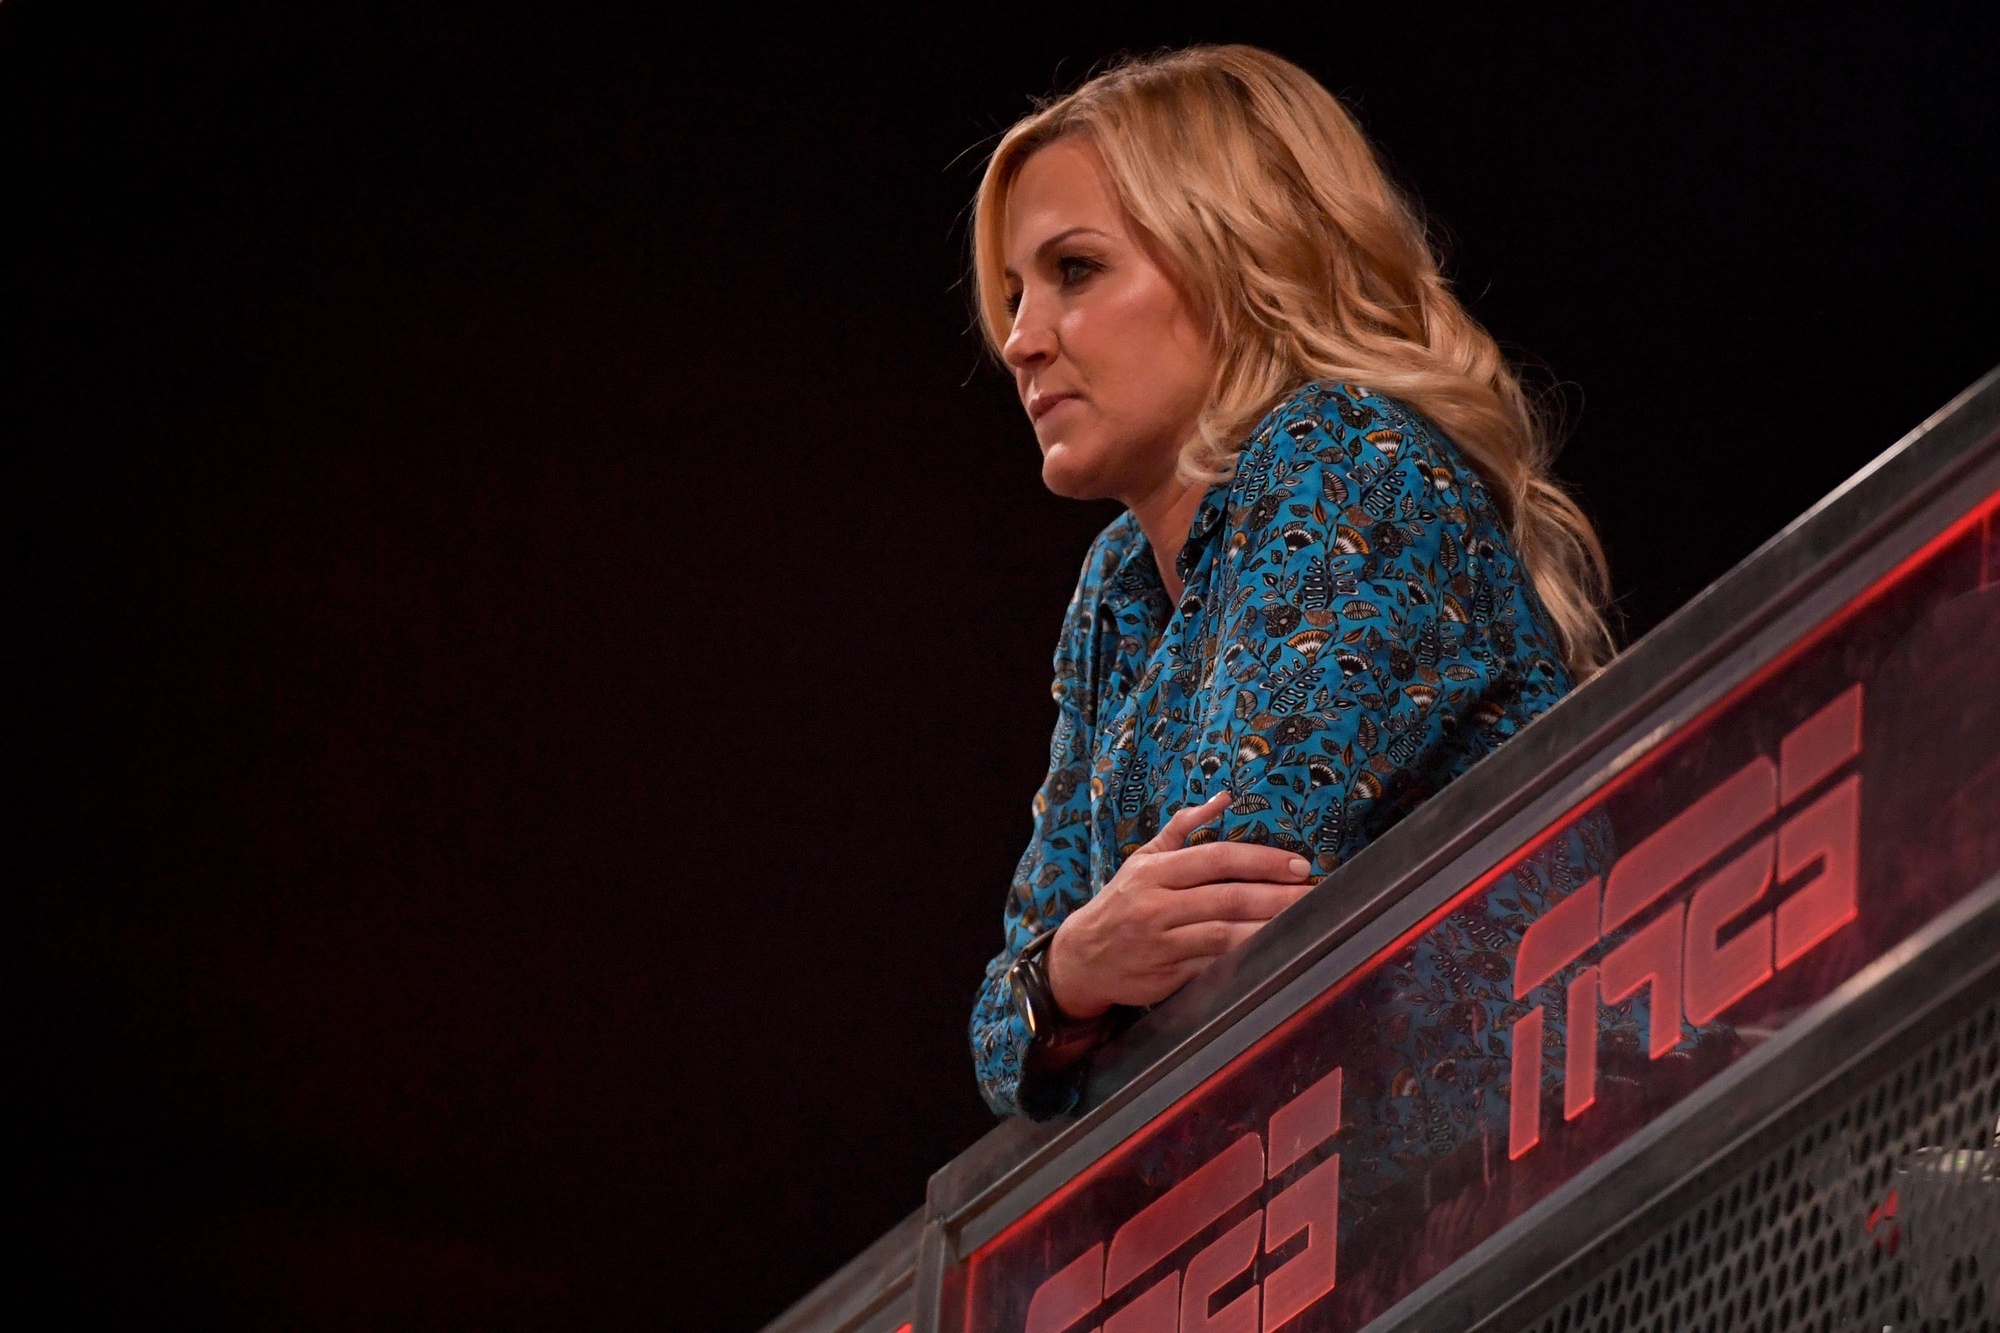 ESPN has not let NBA Countdown “marinate” as talent changes too frequently, ex-host Michelle Beadle tells FOS.